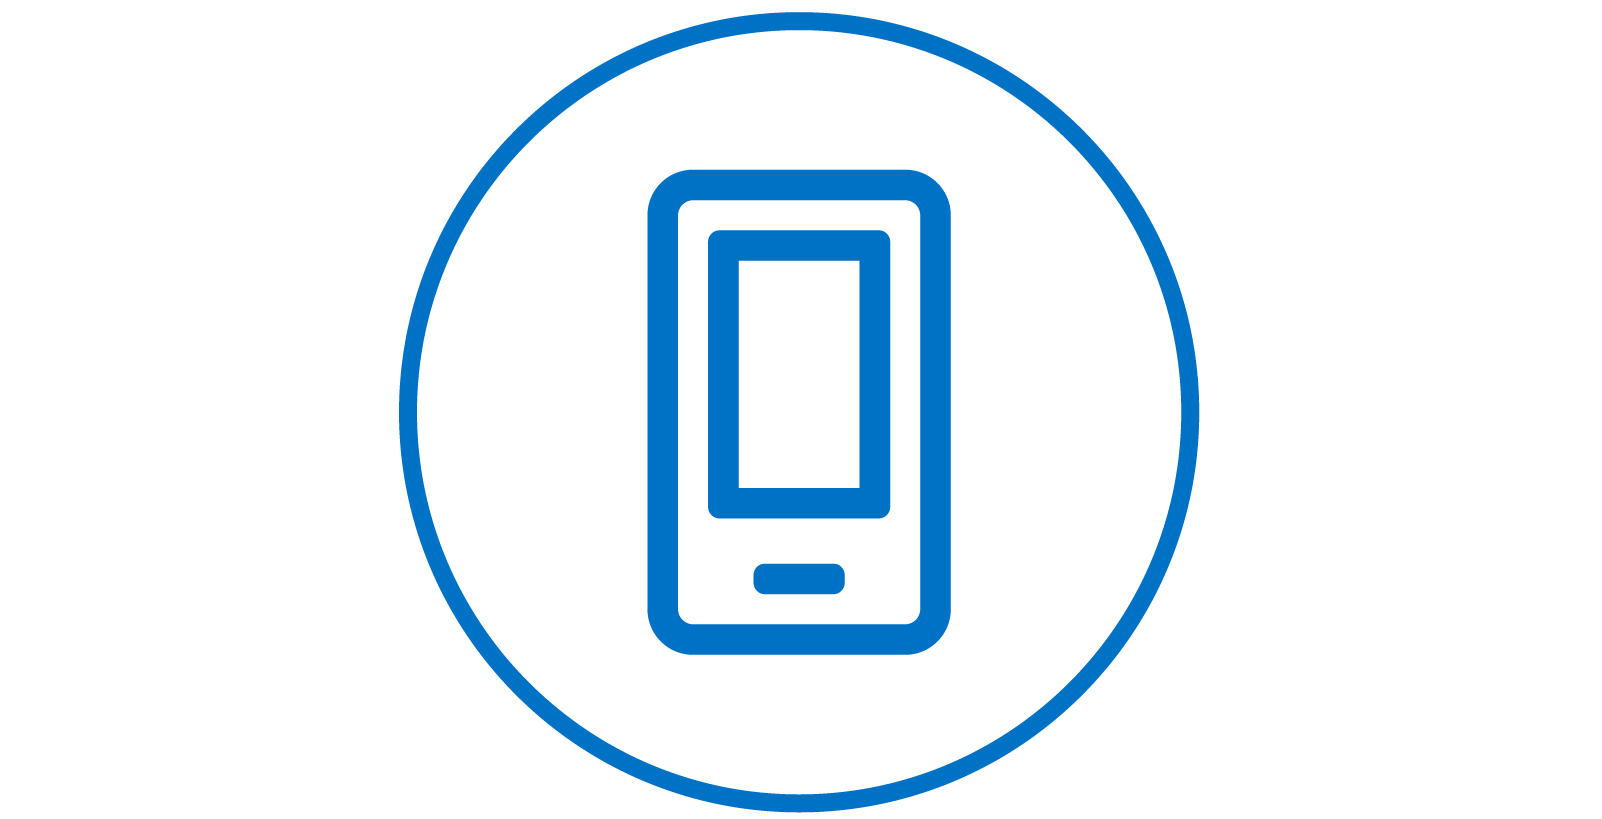 Mobile Phone Icon.